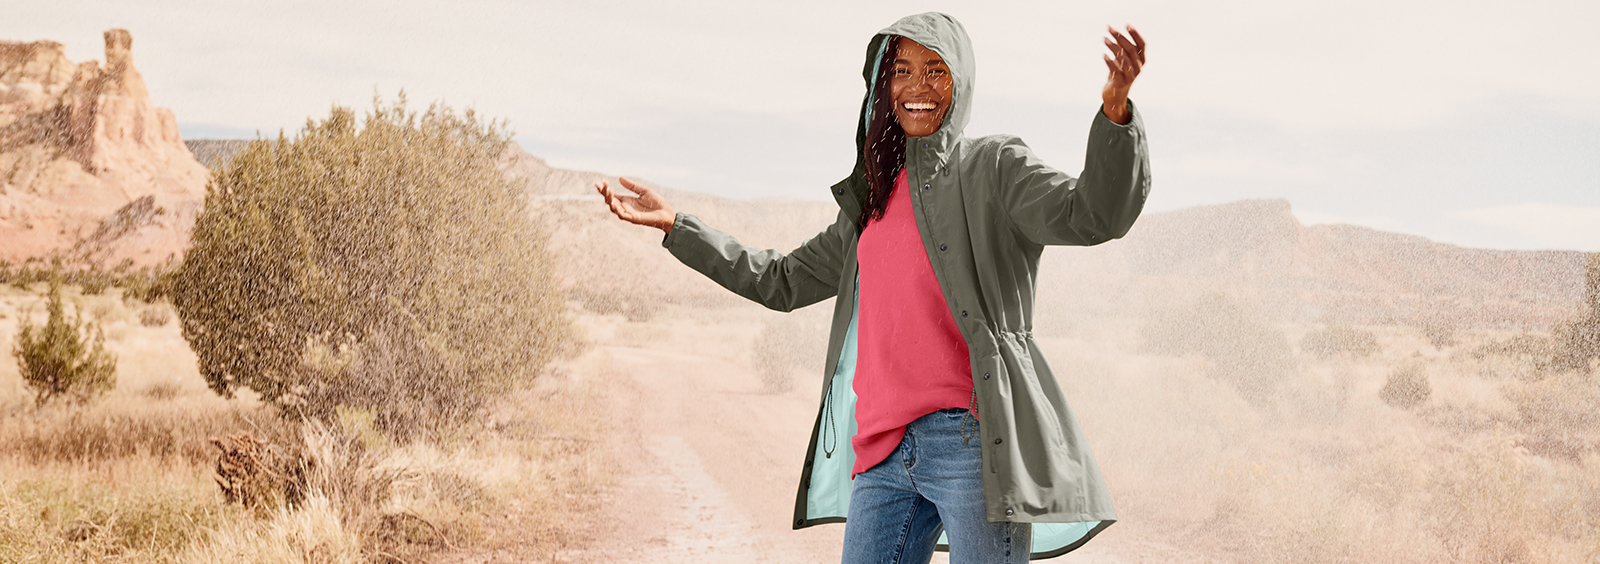 The Best Spring Coats and Jackets to Bring on a Hiking Trip